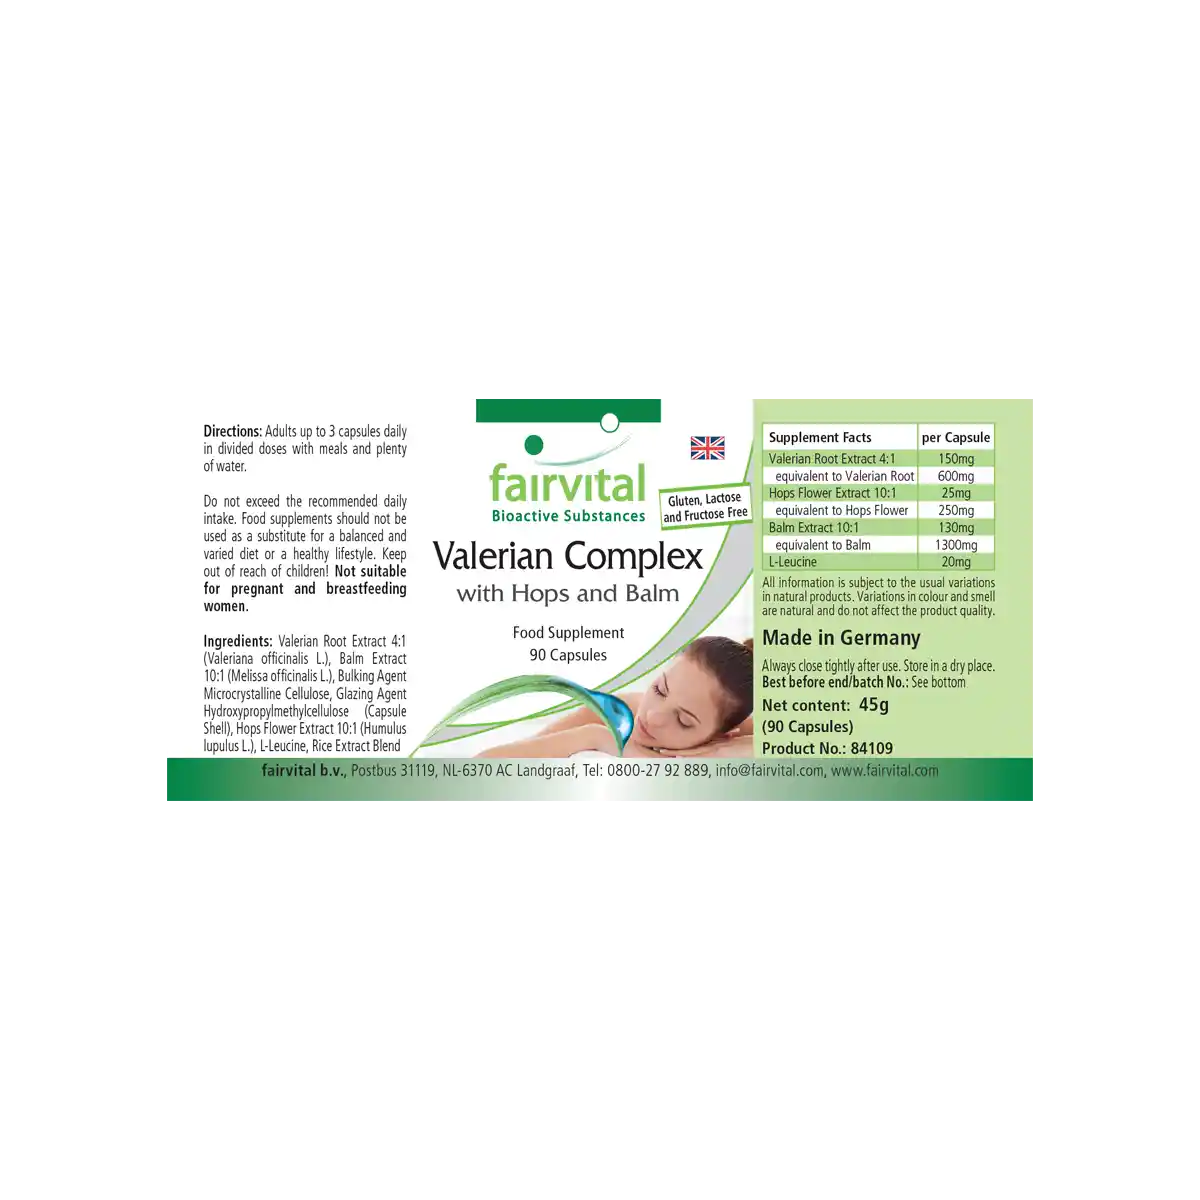 Valerian complex with hops and balm - 90 capsules